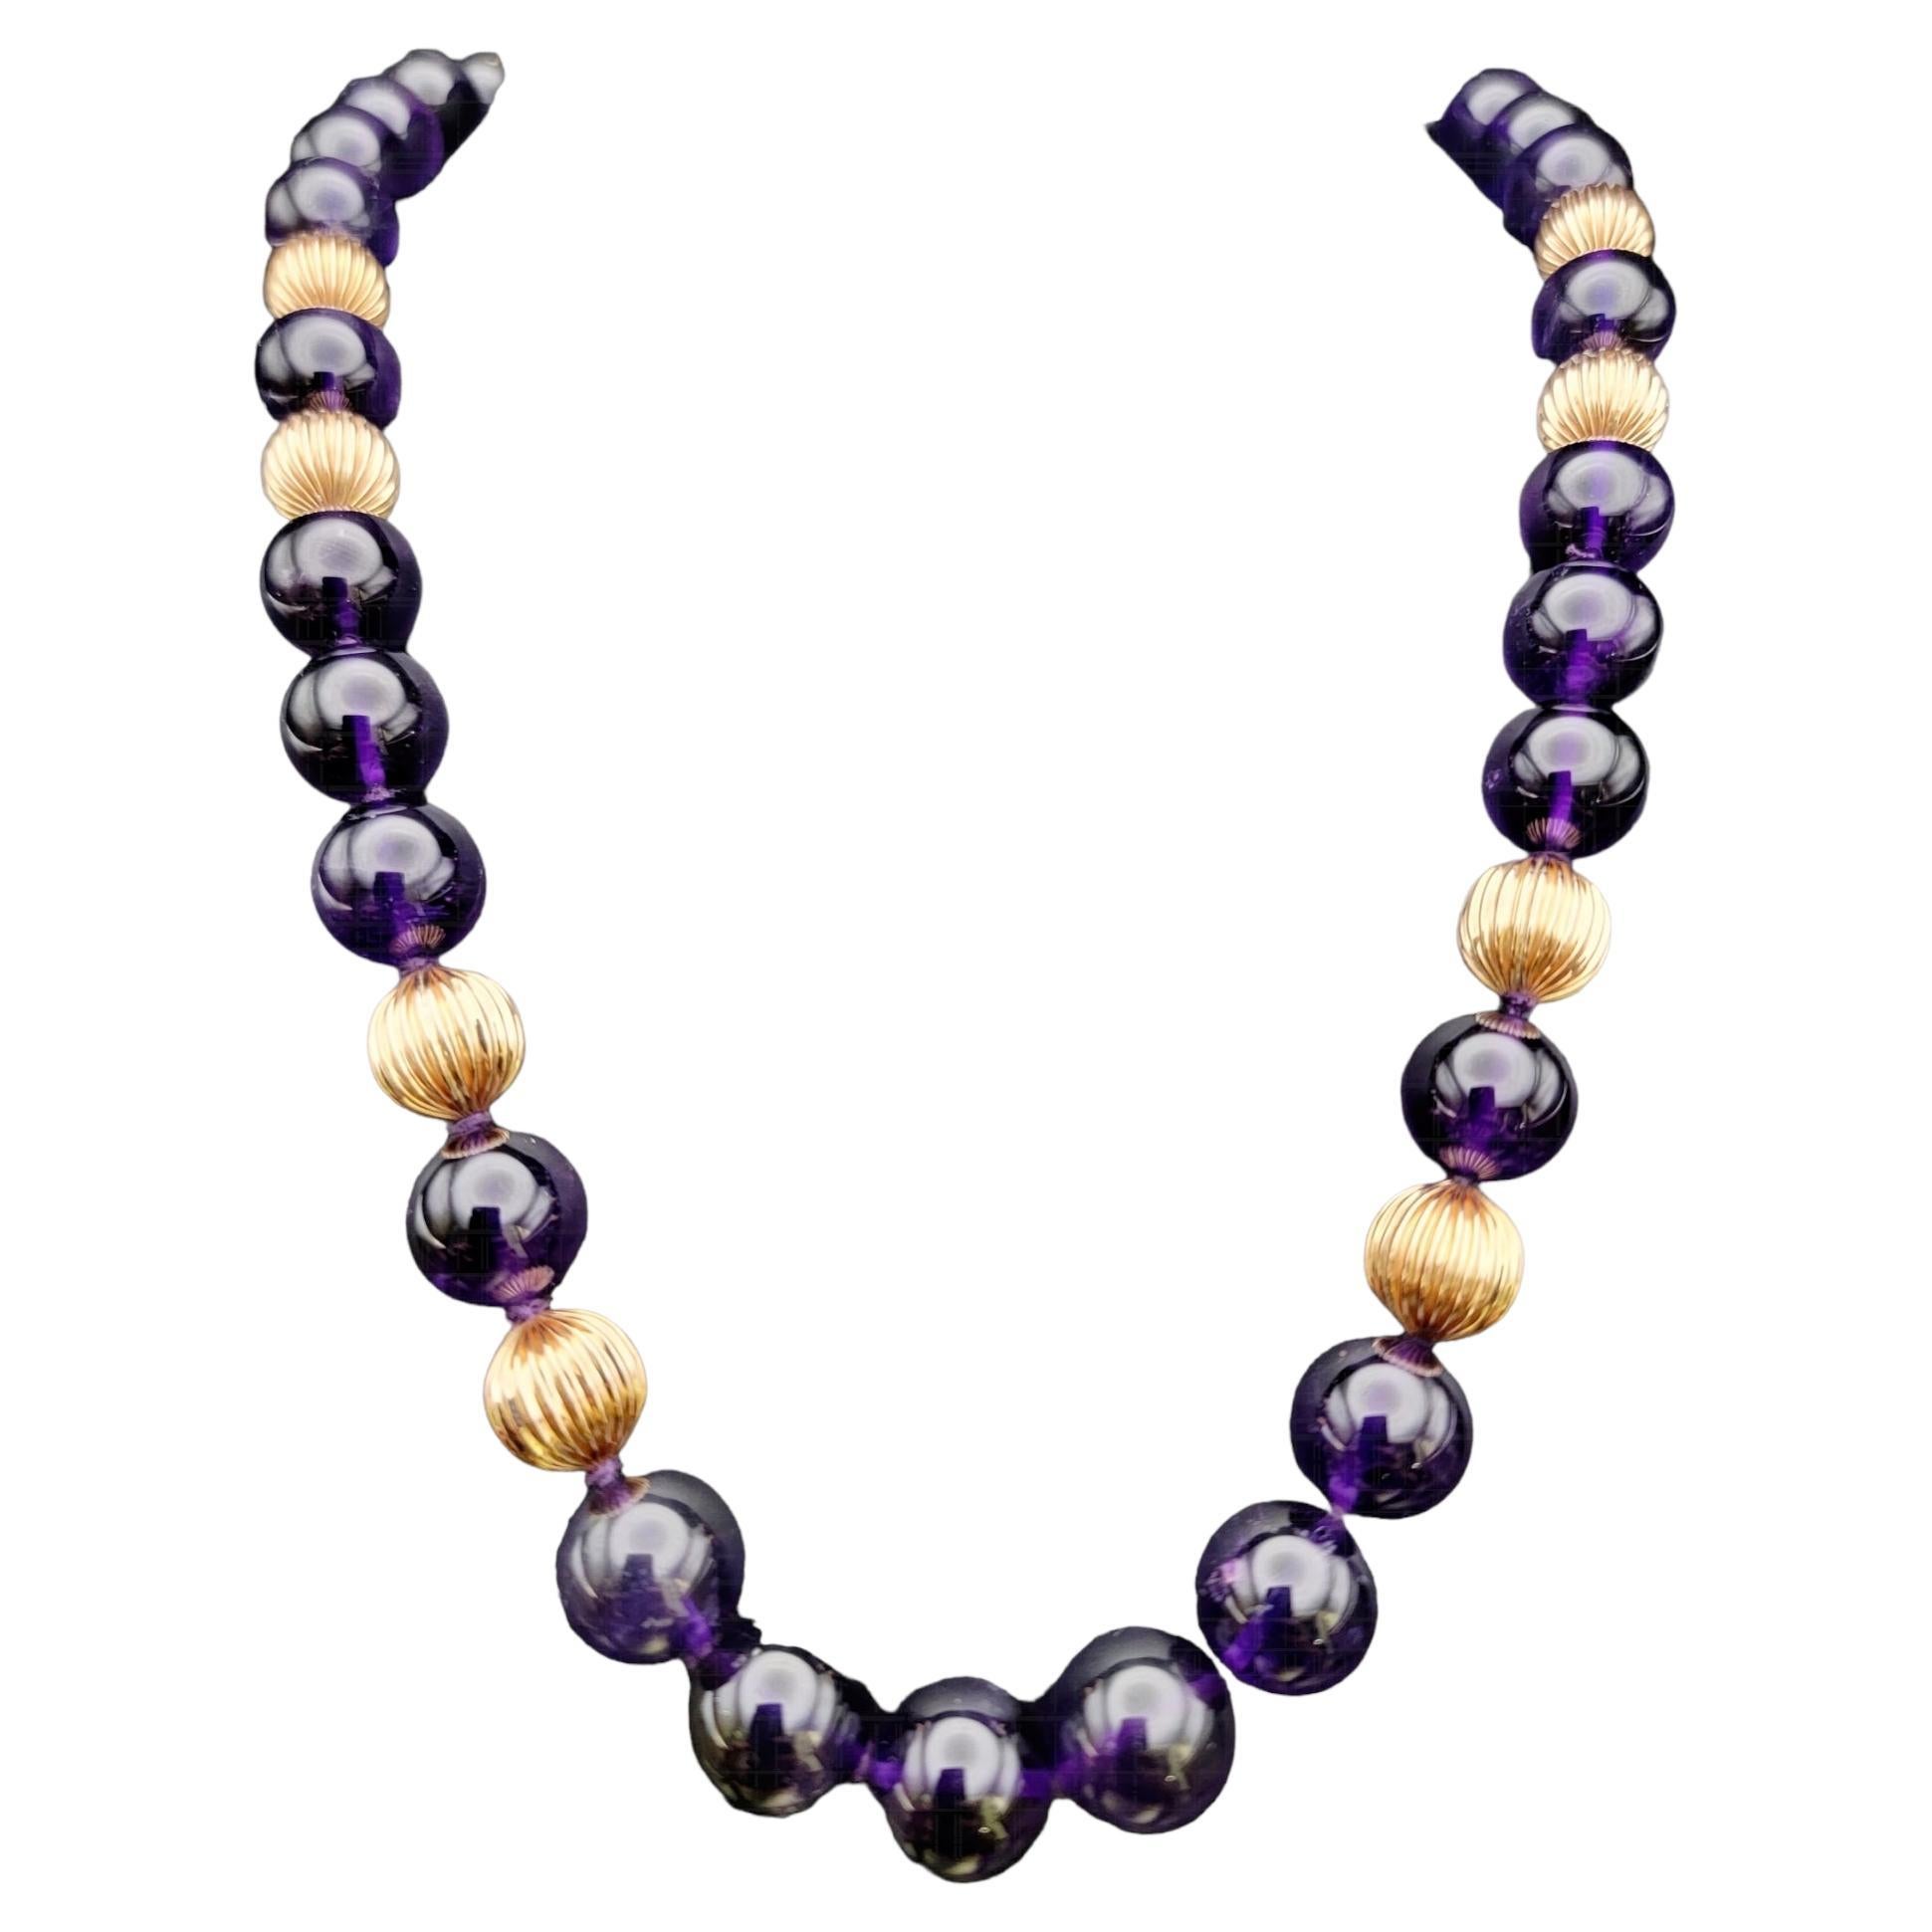 Enhance your fine jewelry collection with this stunning beaded amethyst single strand necklace. Crafted with meticulous attention to detail, this exquisite piece embodies a perfect fusion of sophistication and natural beauty.

The incredible